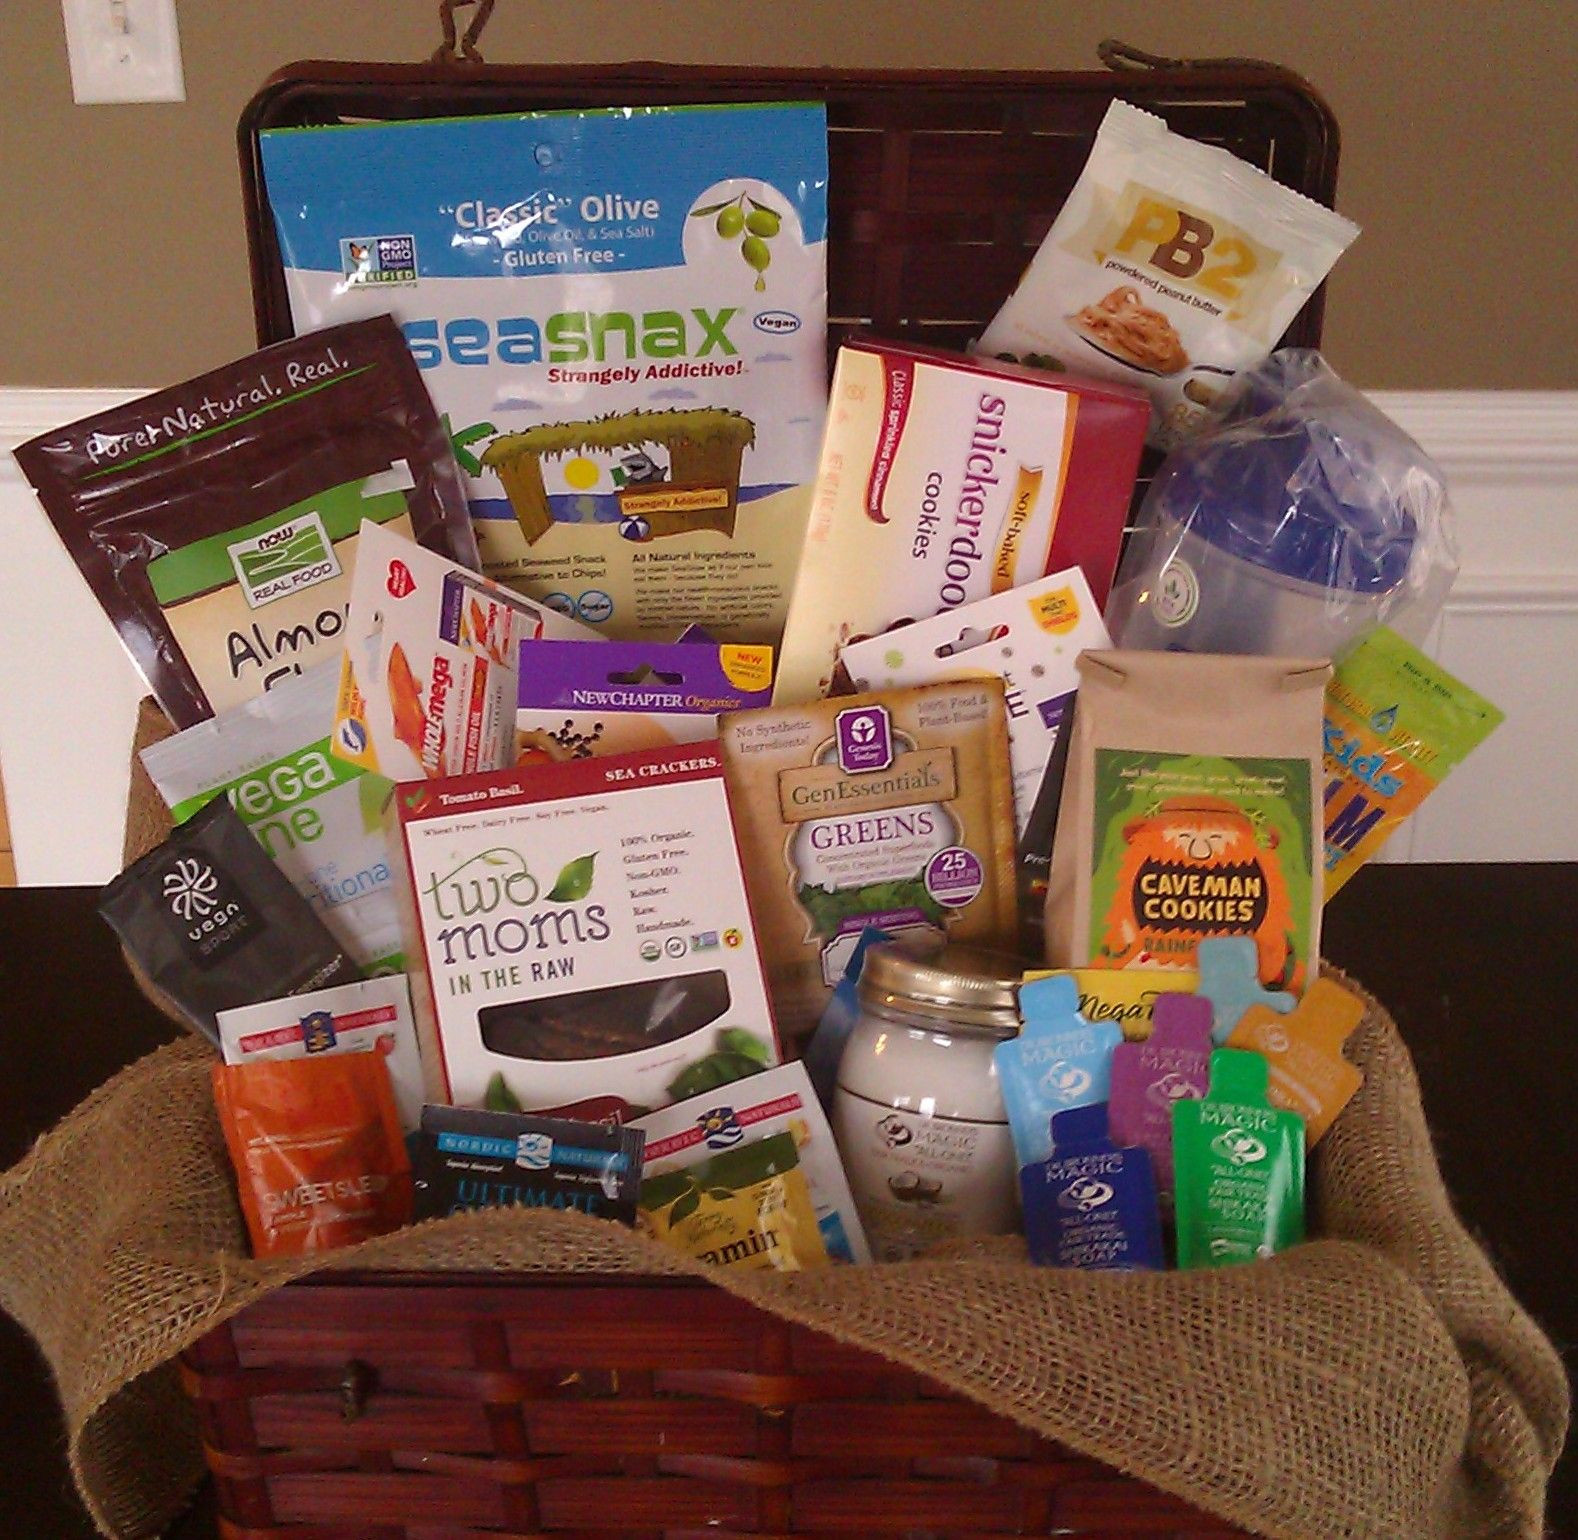 Gift Basket Giveaway Ideas
 Win a Health Nut Gift Basket $75 RV Ends 2 14